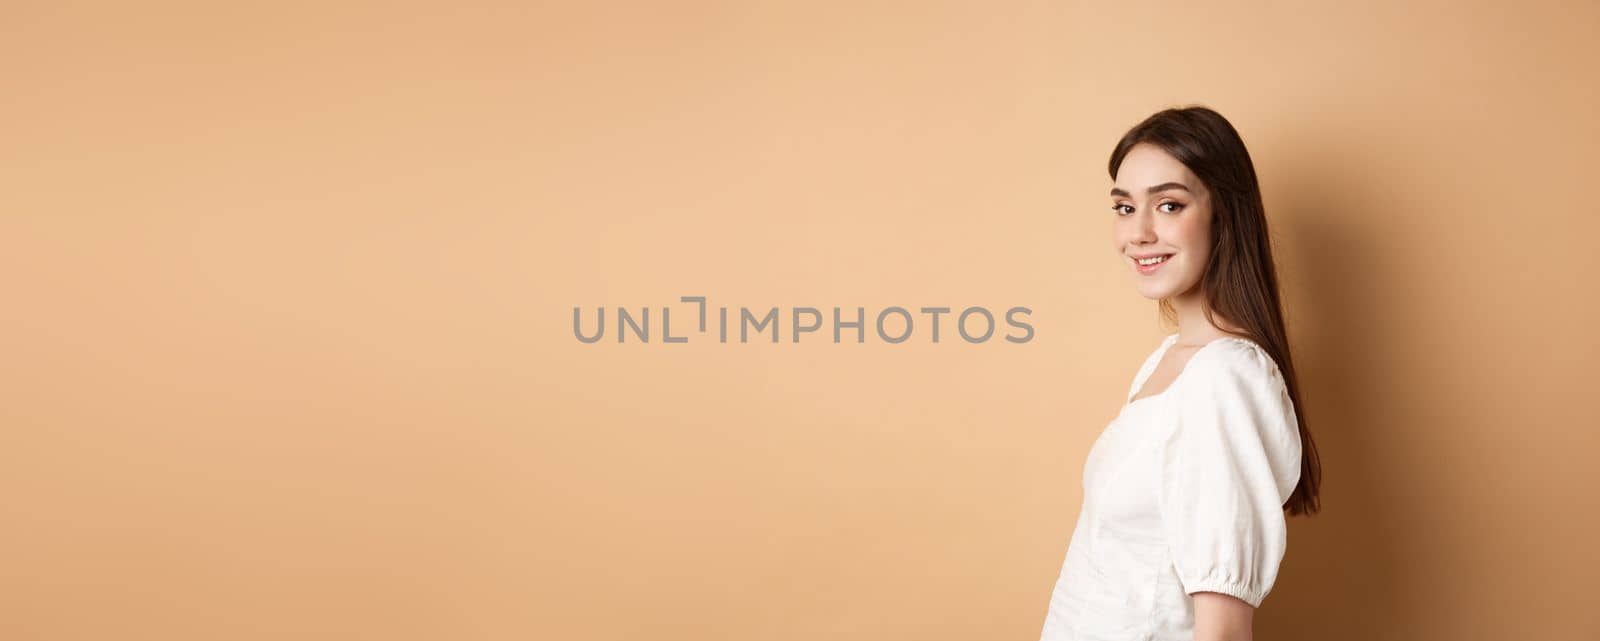 Profile of pretty european girl turn head at camera and smiling coquettish, standing in white blouse against beige background.